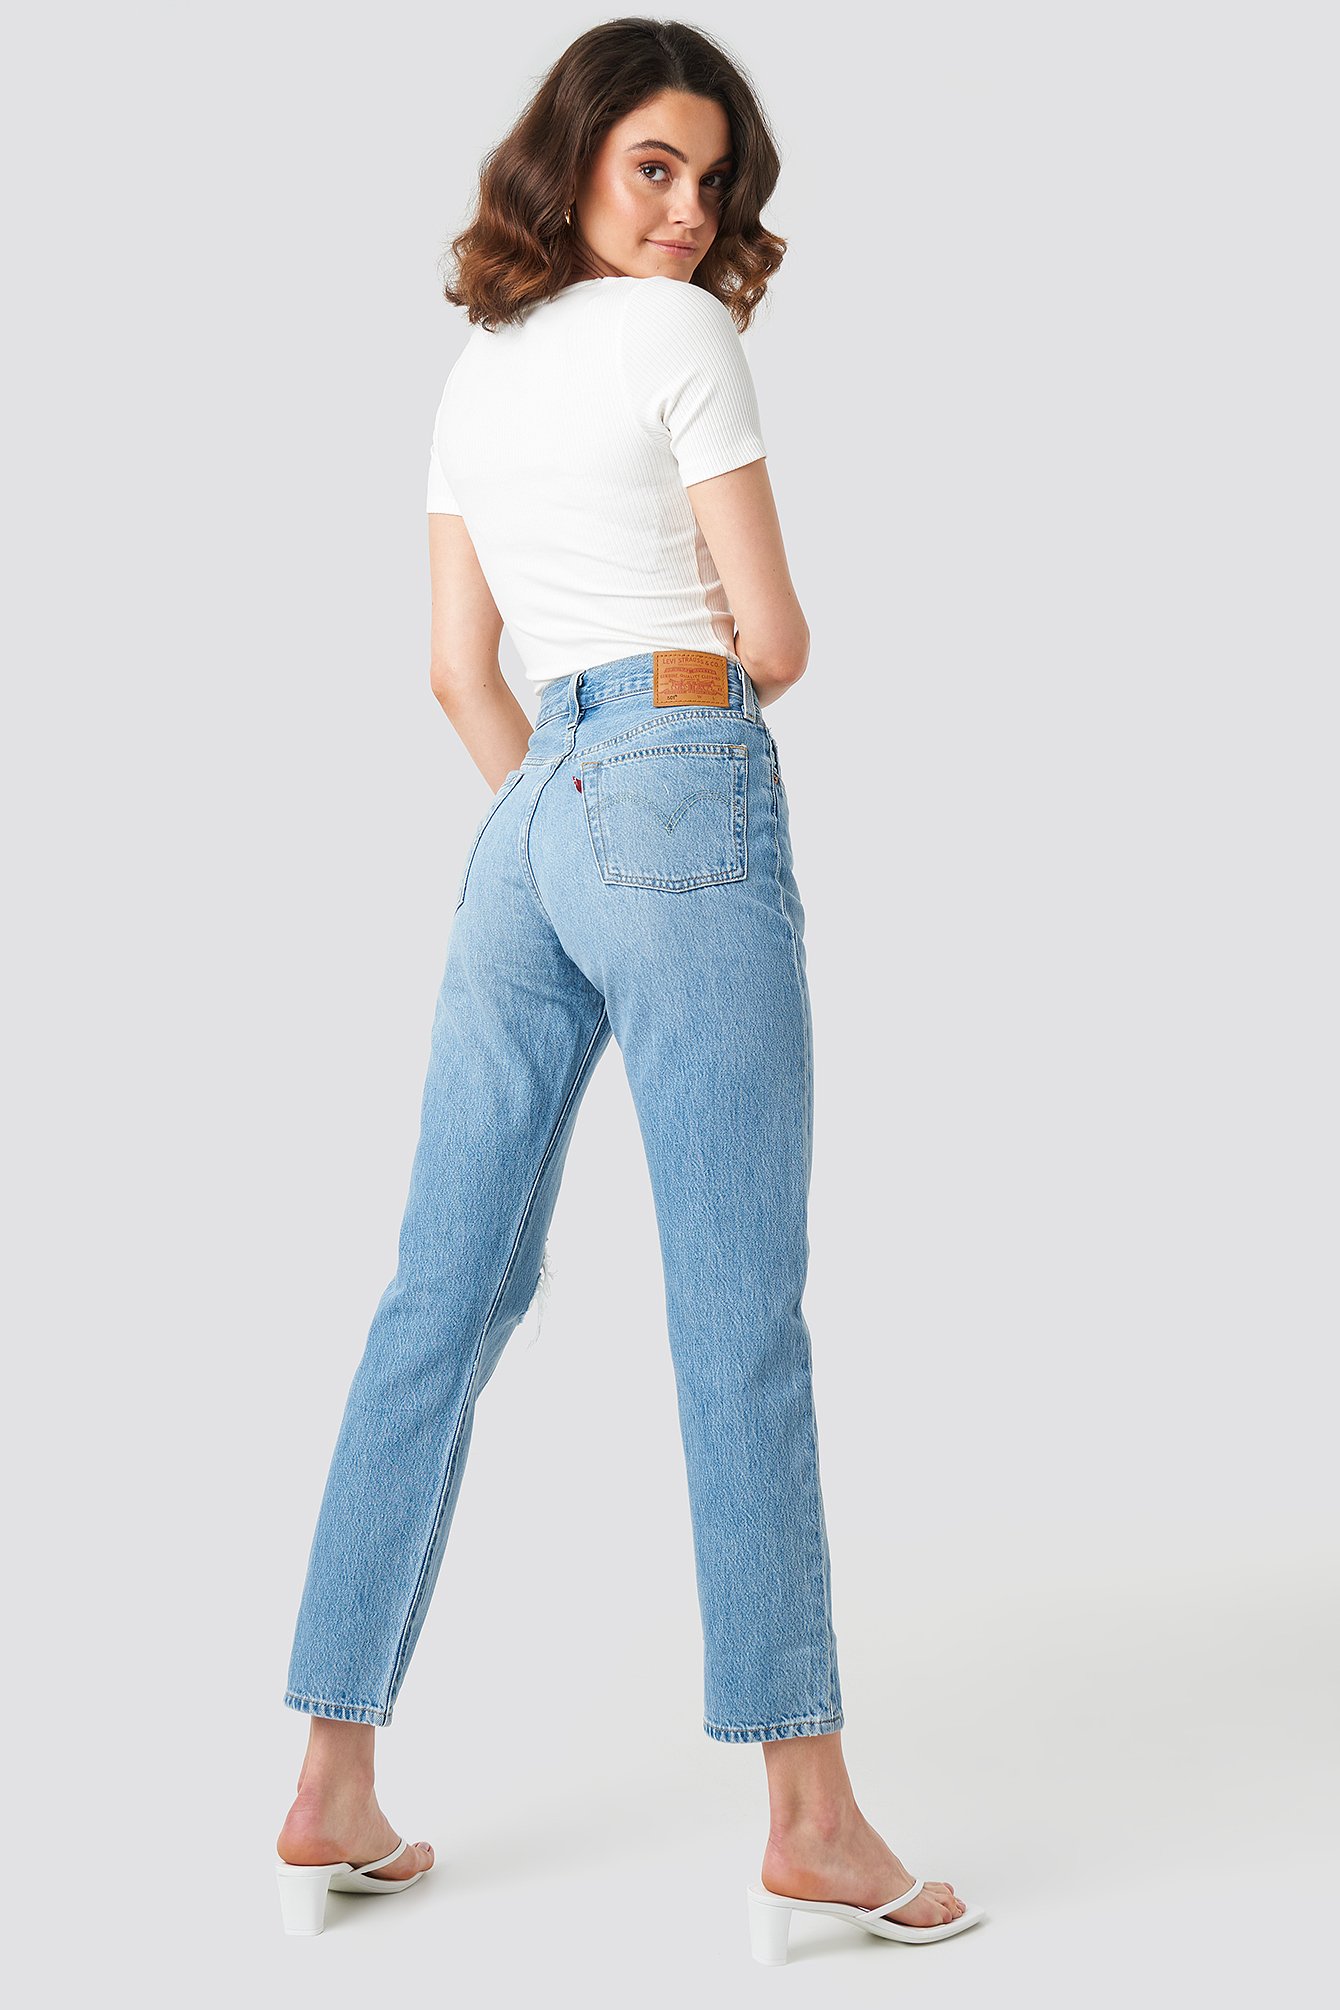 Levi's 501 Crop Jeans - Blue In 